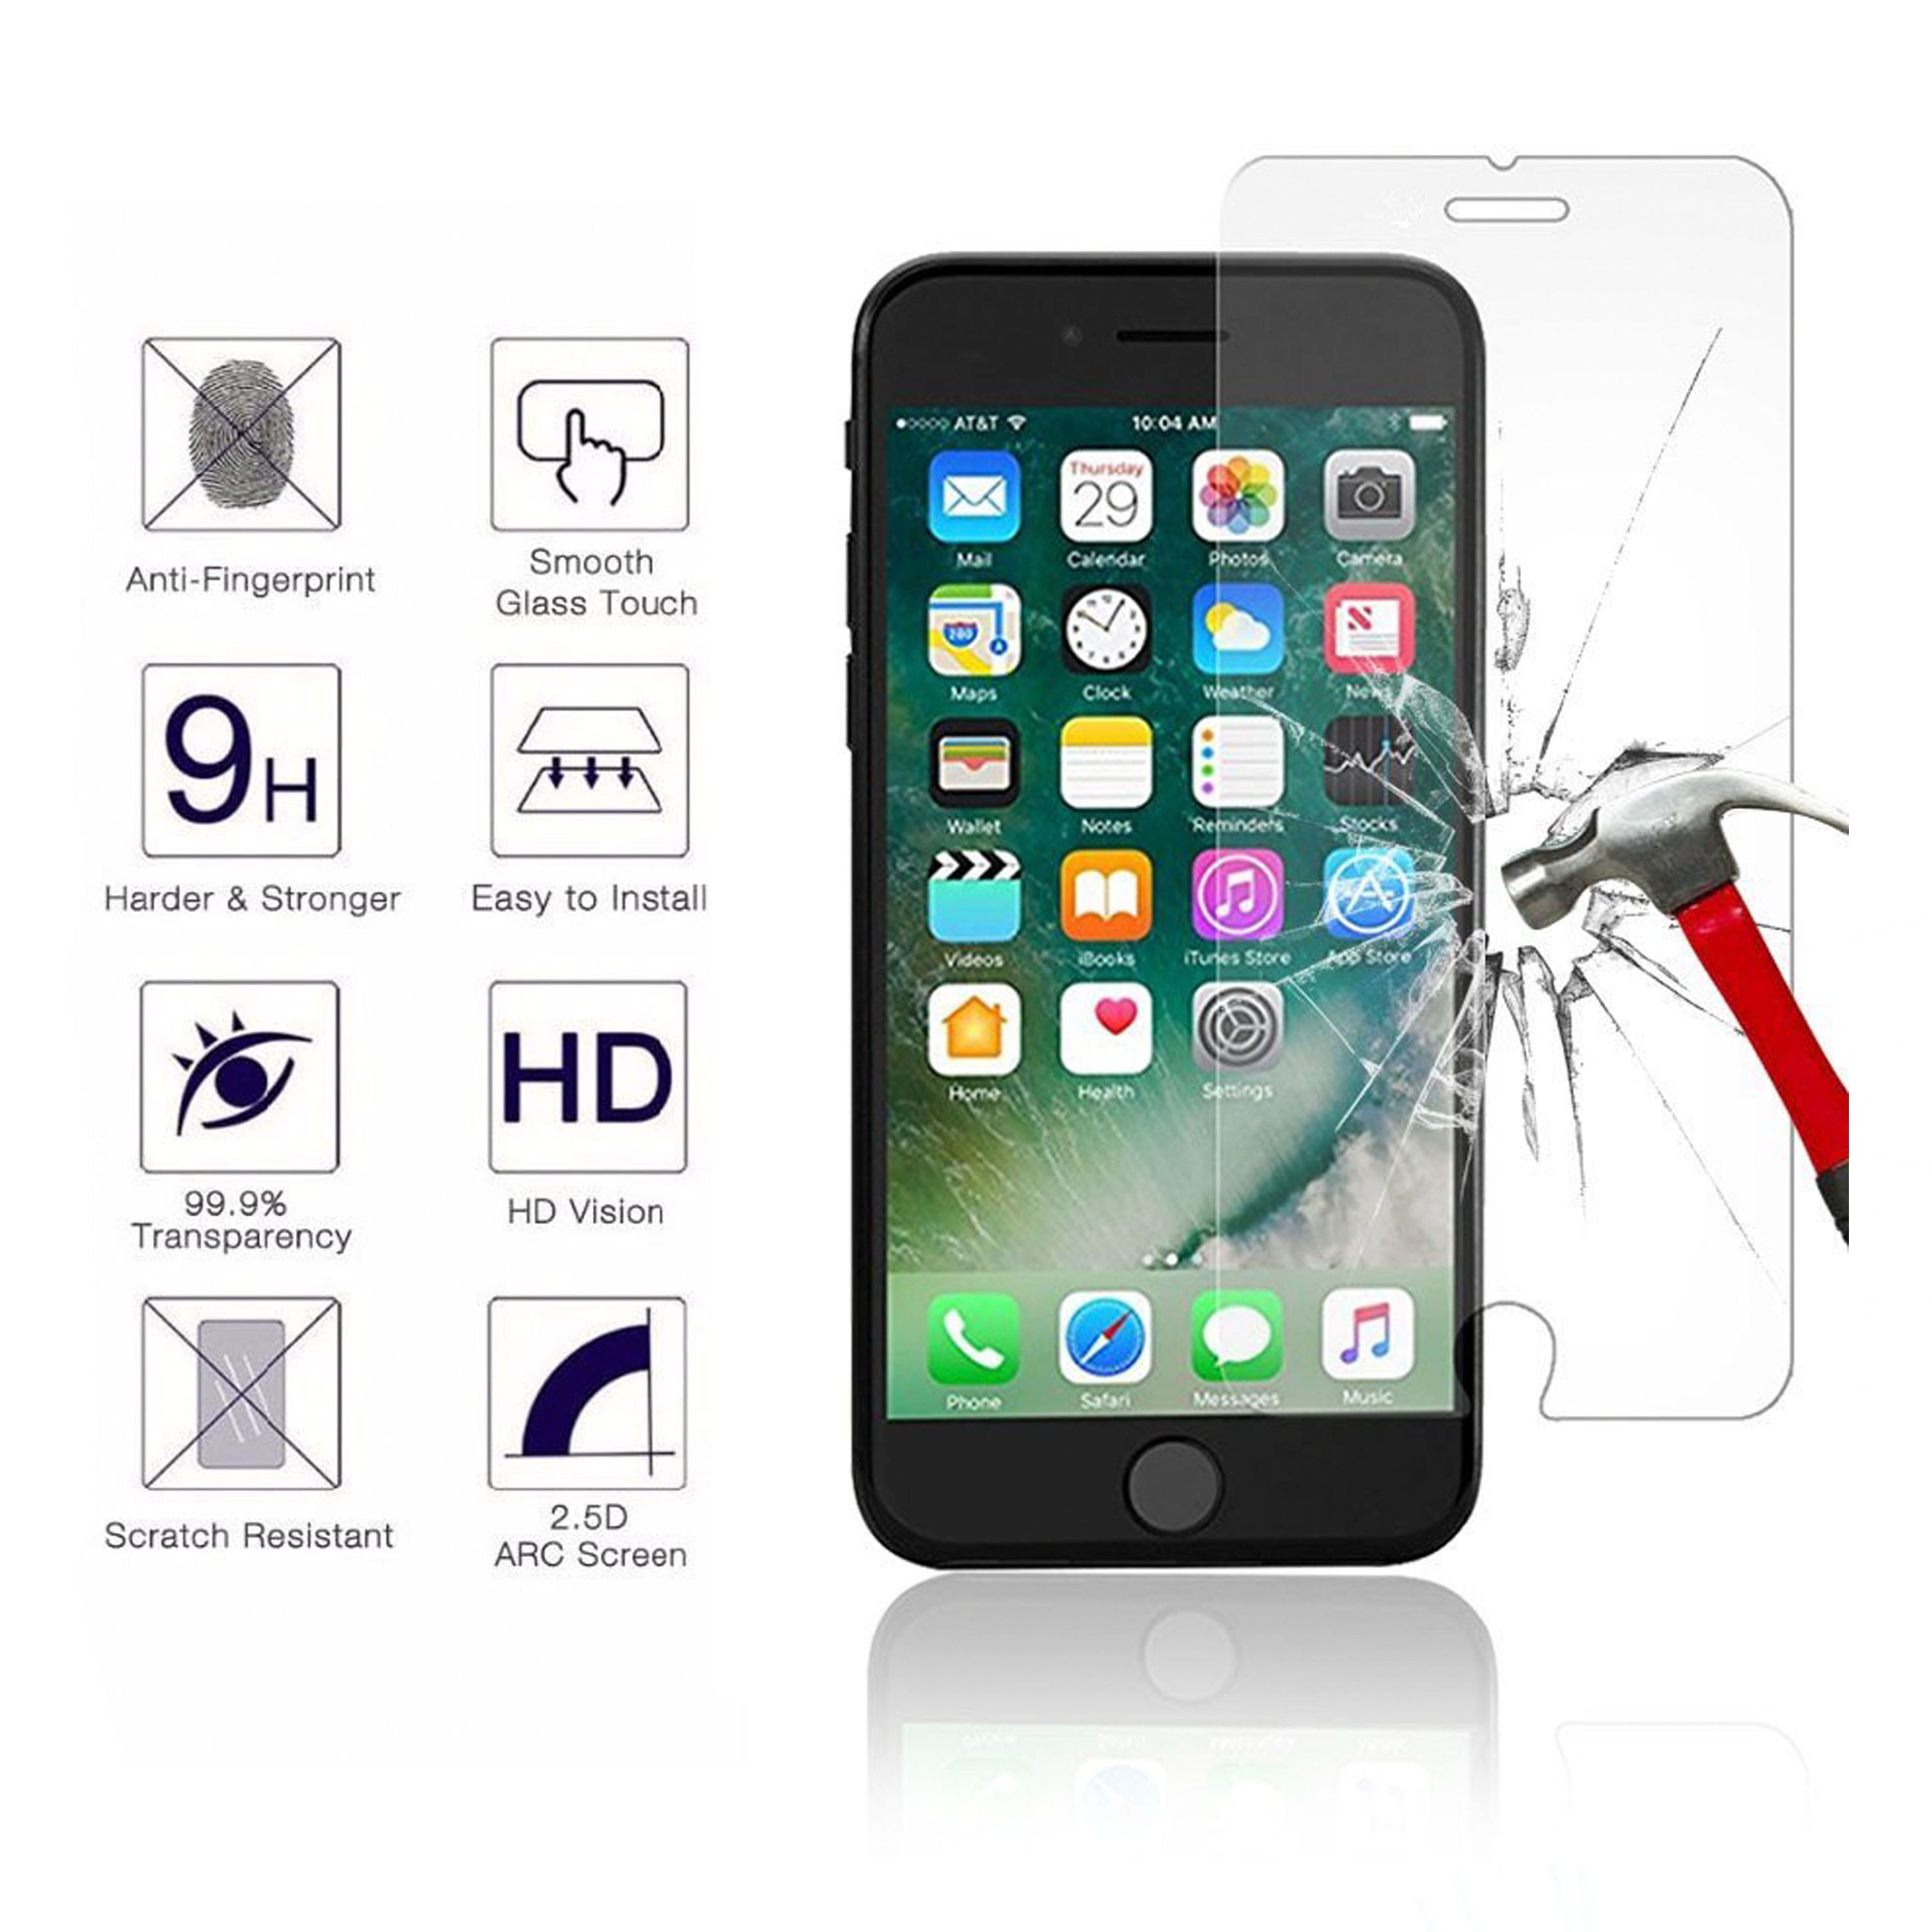 RANVOO 4D Screen Protector for iPhone 7 8 Plus Tempered